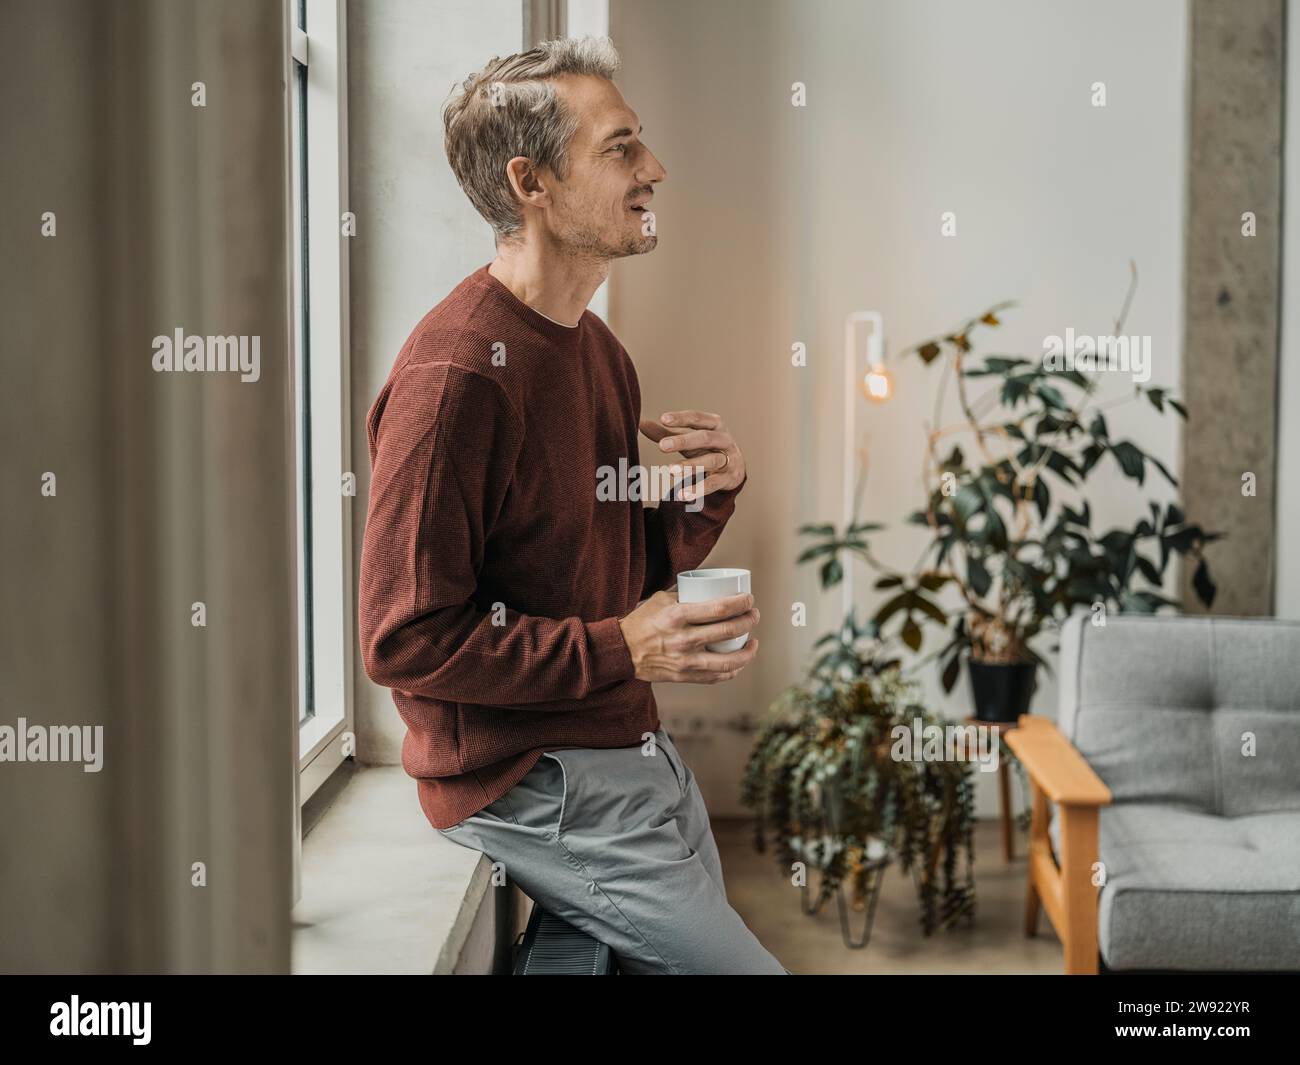 Man holding coffee cup and gesturing at home Stock Photo